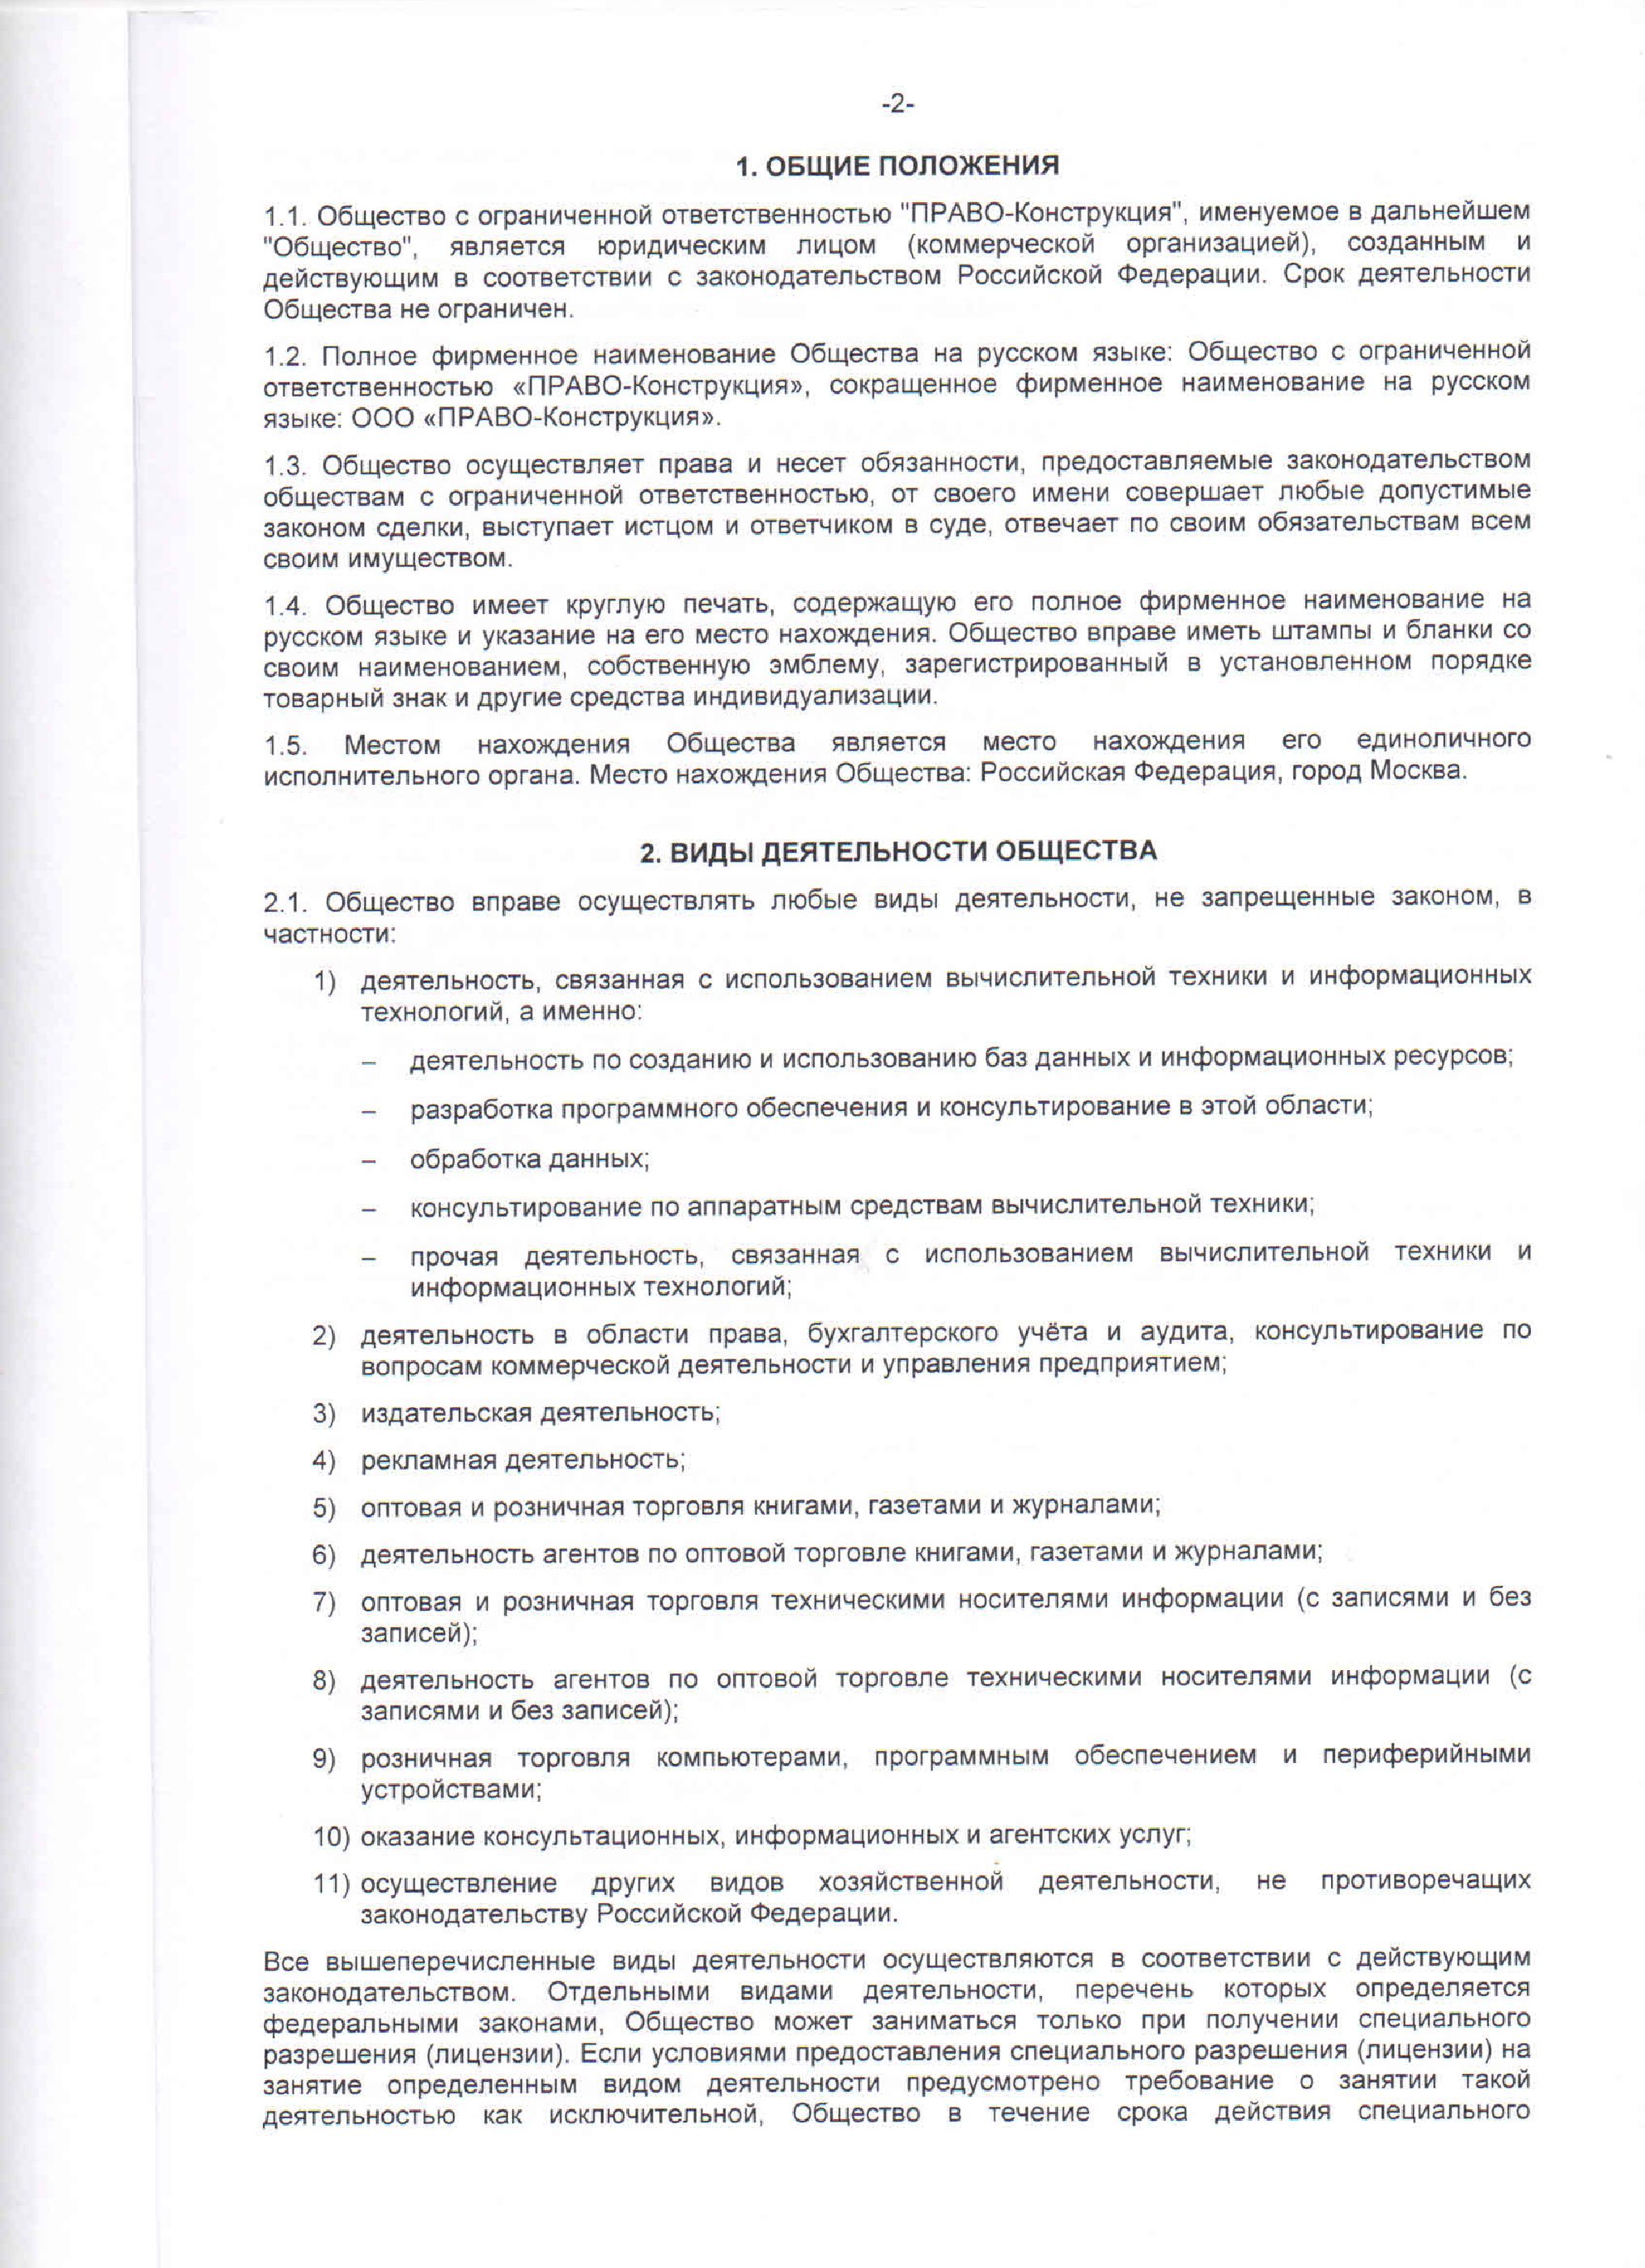 C:\Users\Катюшка\Downloads\imgonline_IMAGES-from-PDF_dqrMe1dgo7\page_0002.jpg